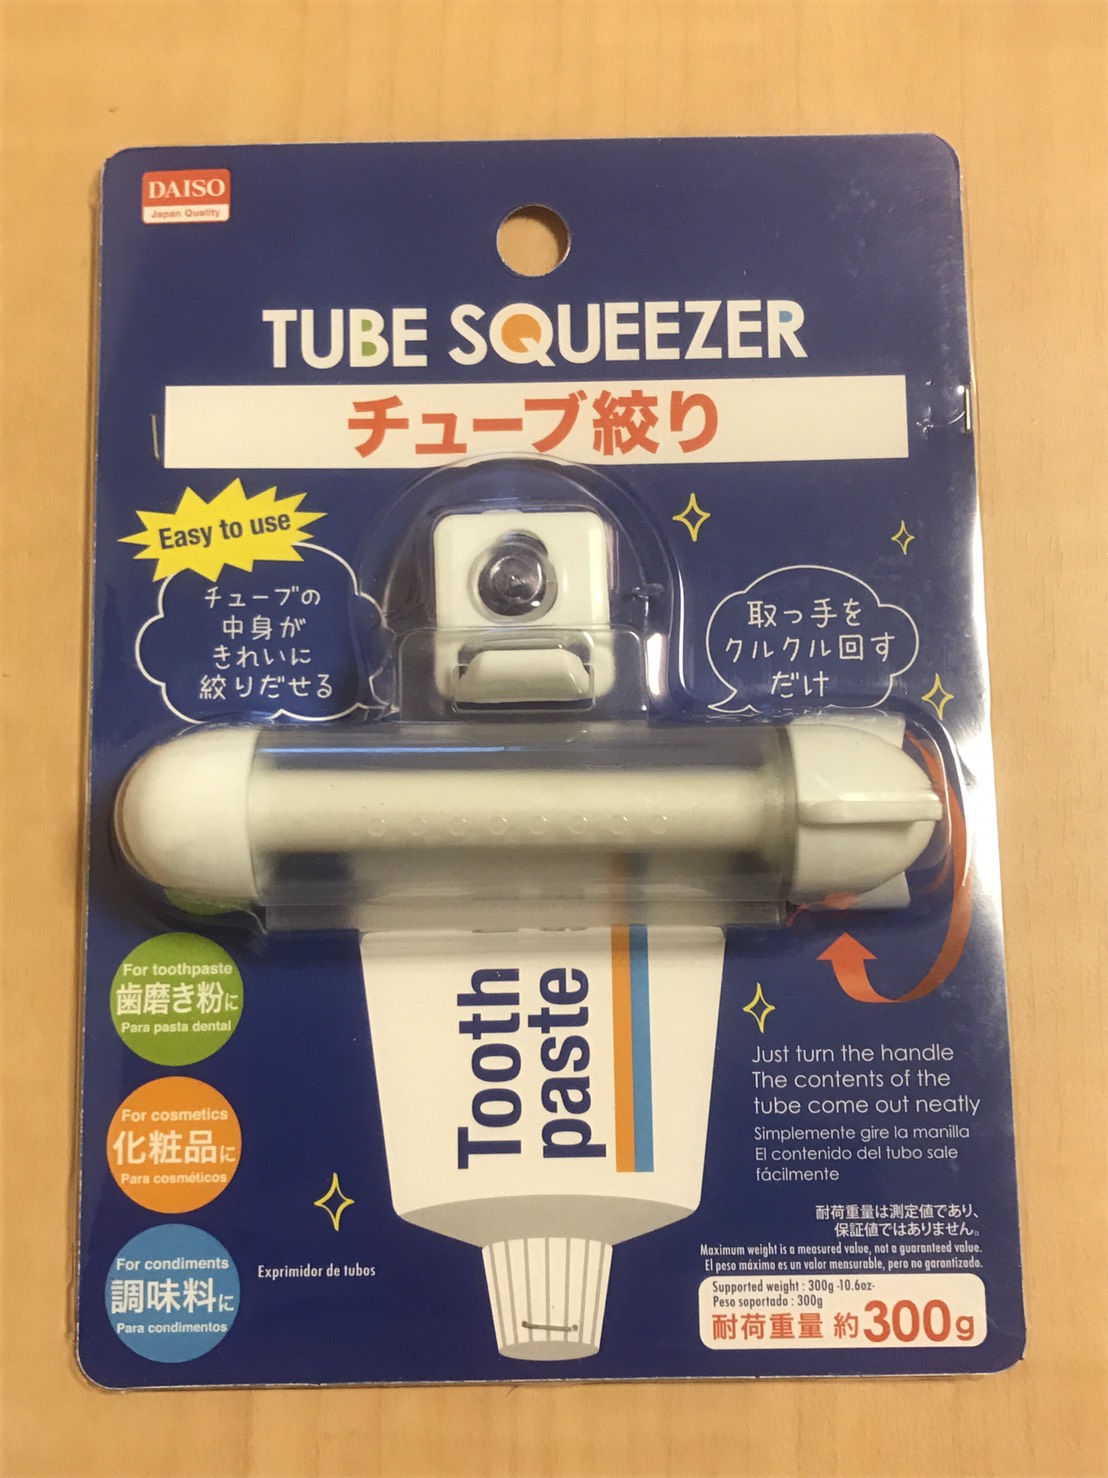 TUBE SQUEEZER from DAISO